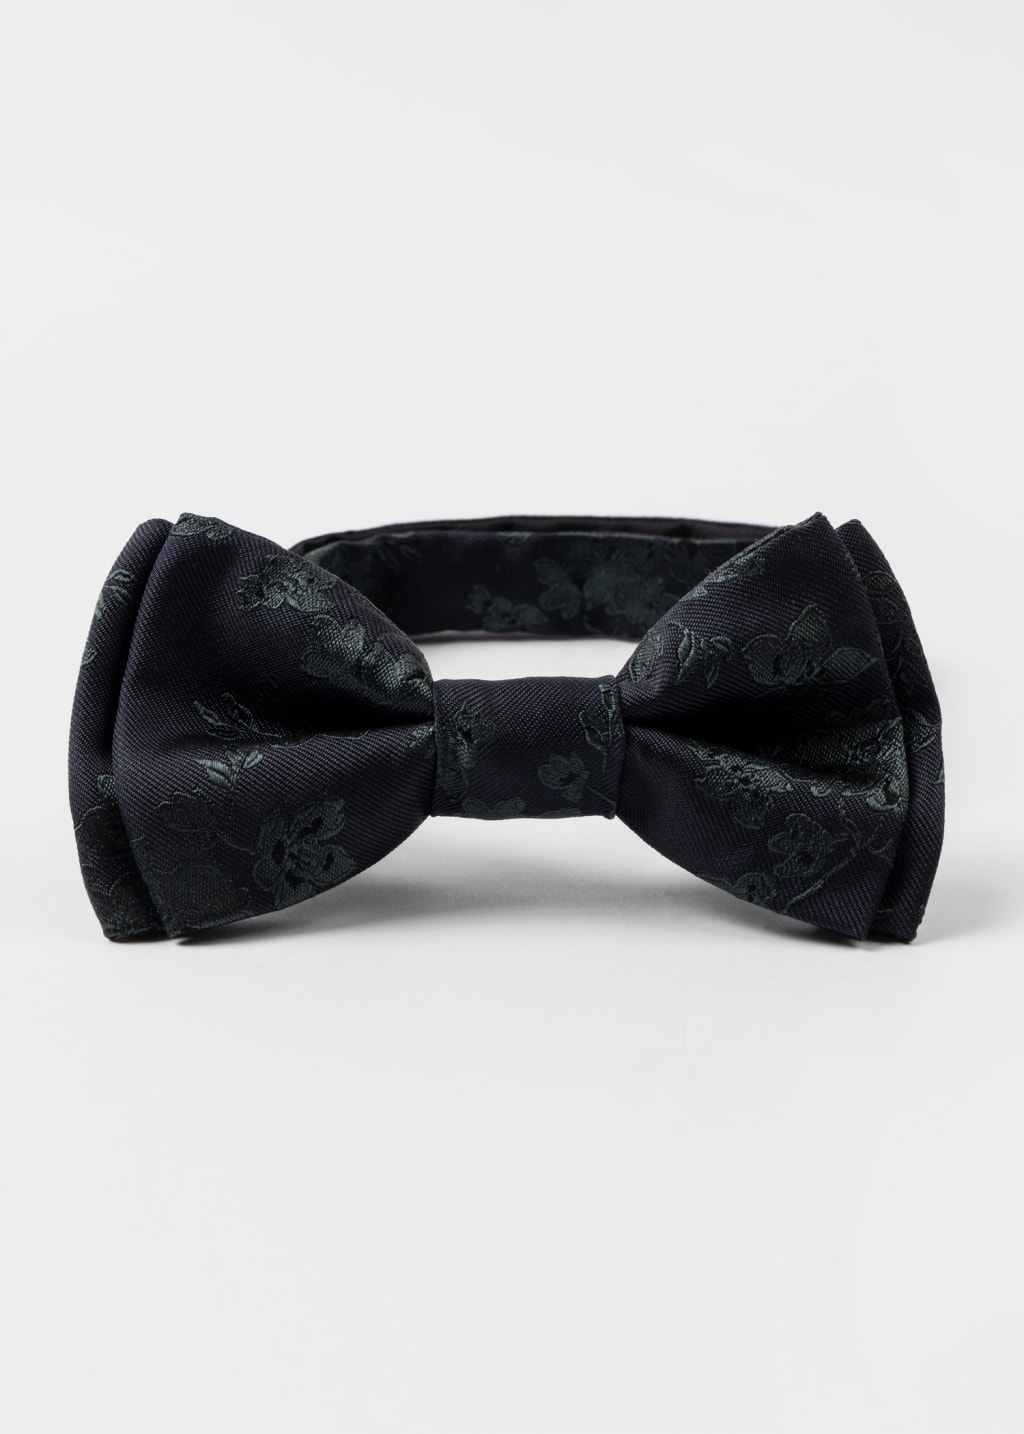 Front View - Black Silk Floral Bow Tie Paul Smith